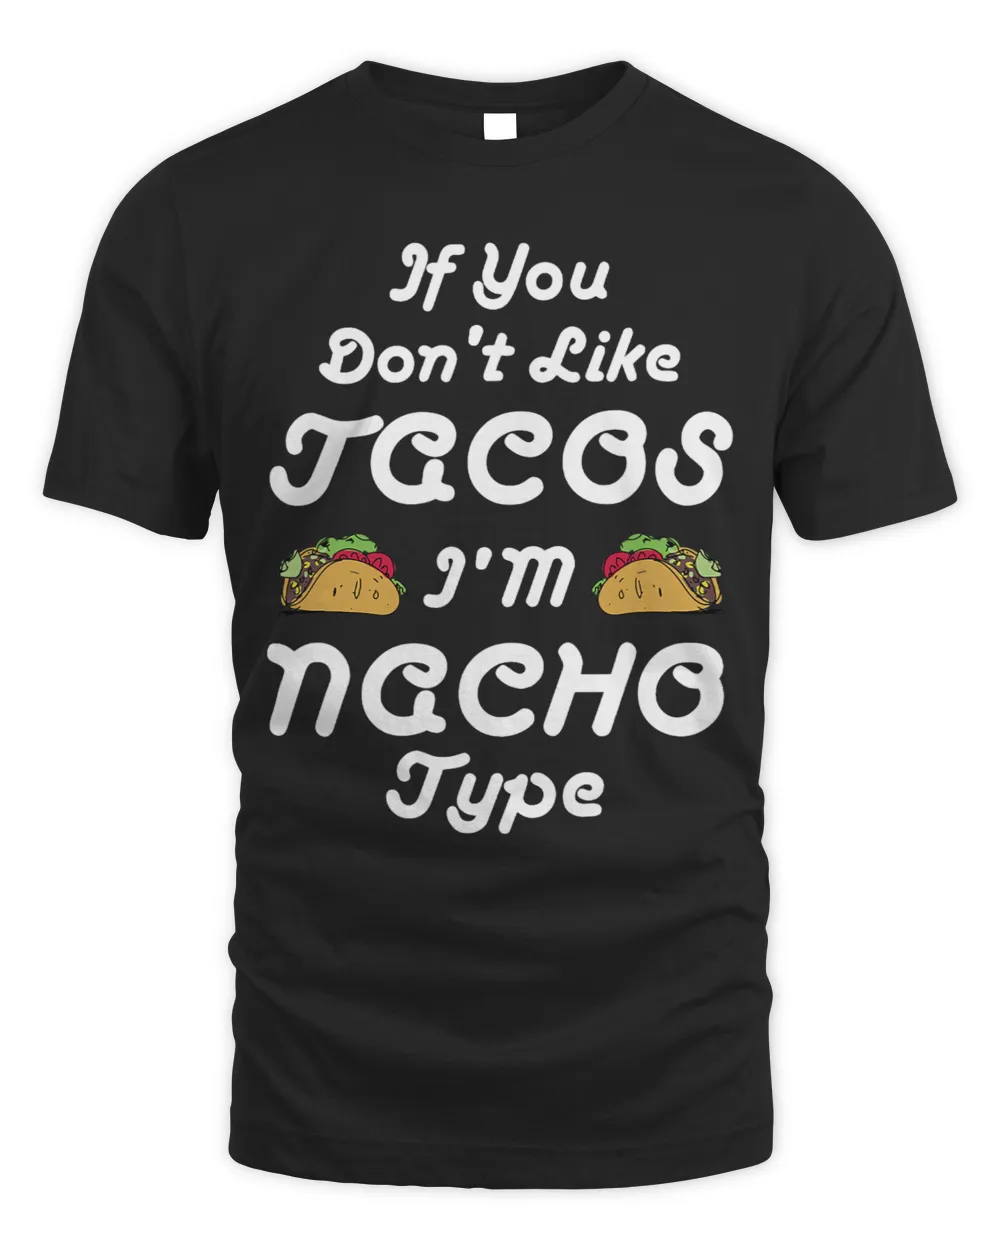 With my mind on tacos and tacos on my mind hilarious design